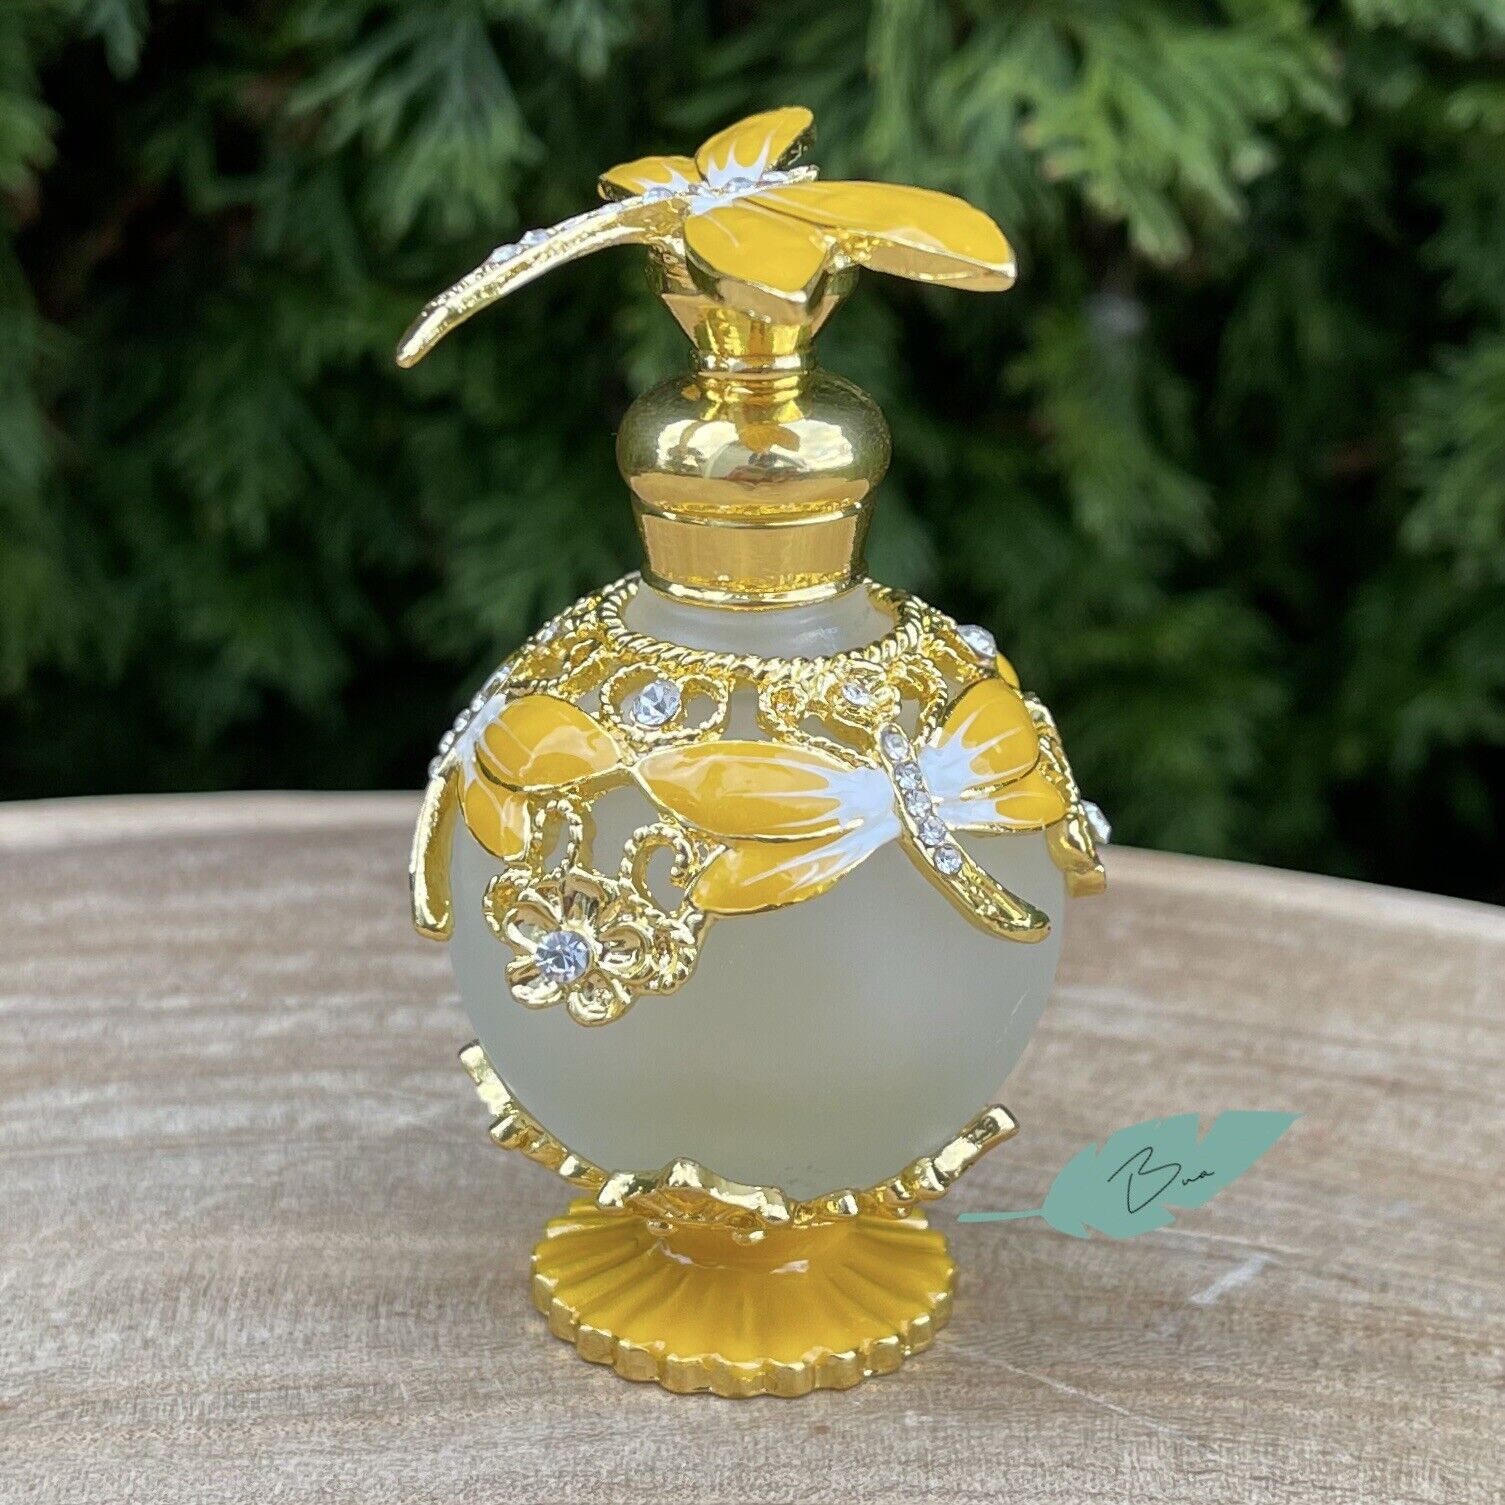 Dragonfly Vintage-Style Perfume Bottle 25mL in Pineapple Yellow